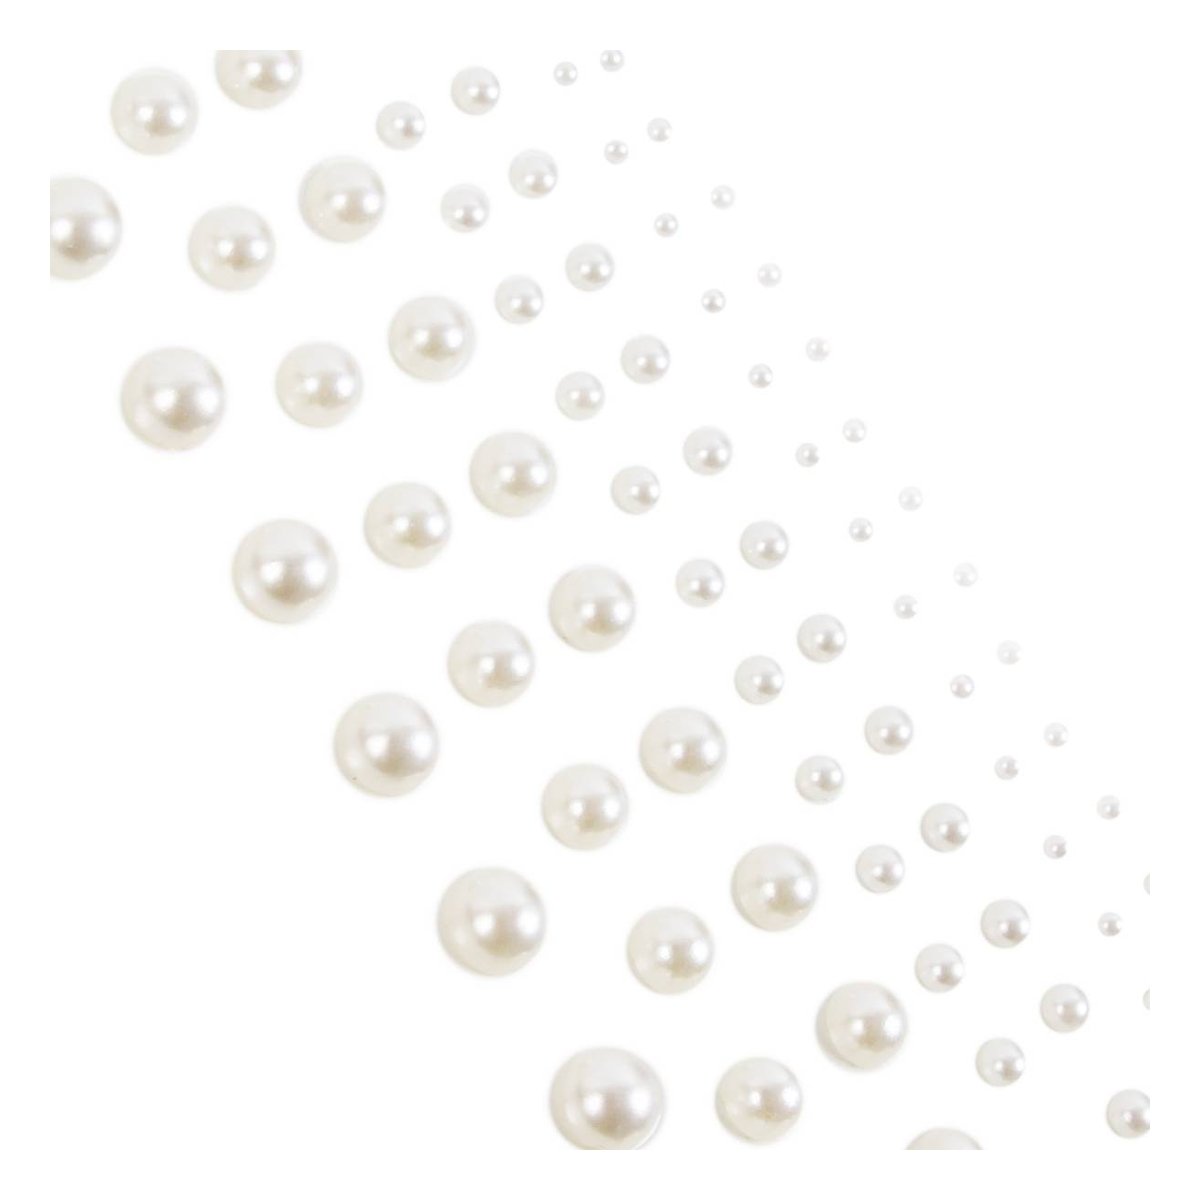 1000 x Self Adhesive Pearls Gems 3mm White Mini Flat Backed Round Pearls  Beads Strips Embellishments